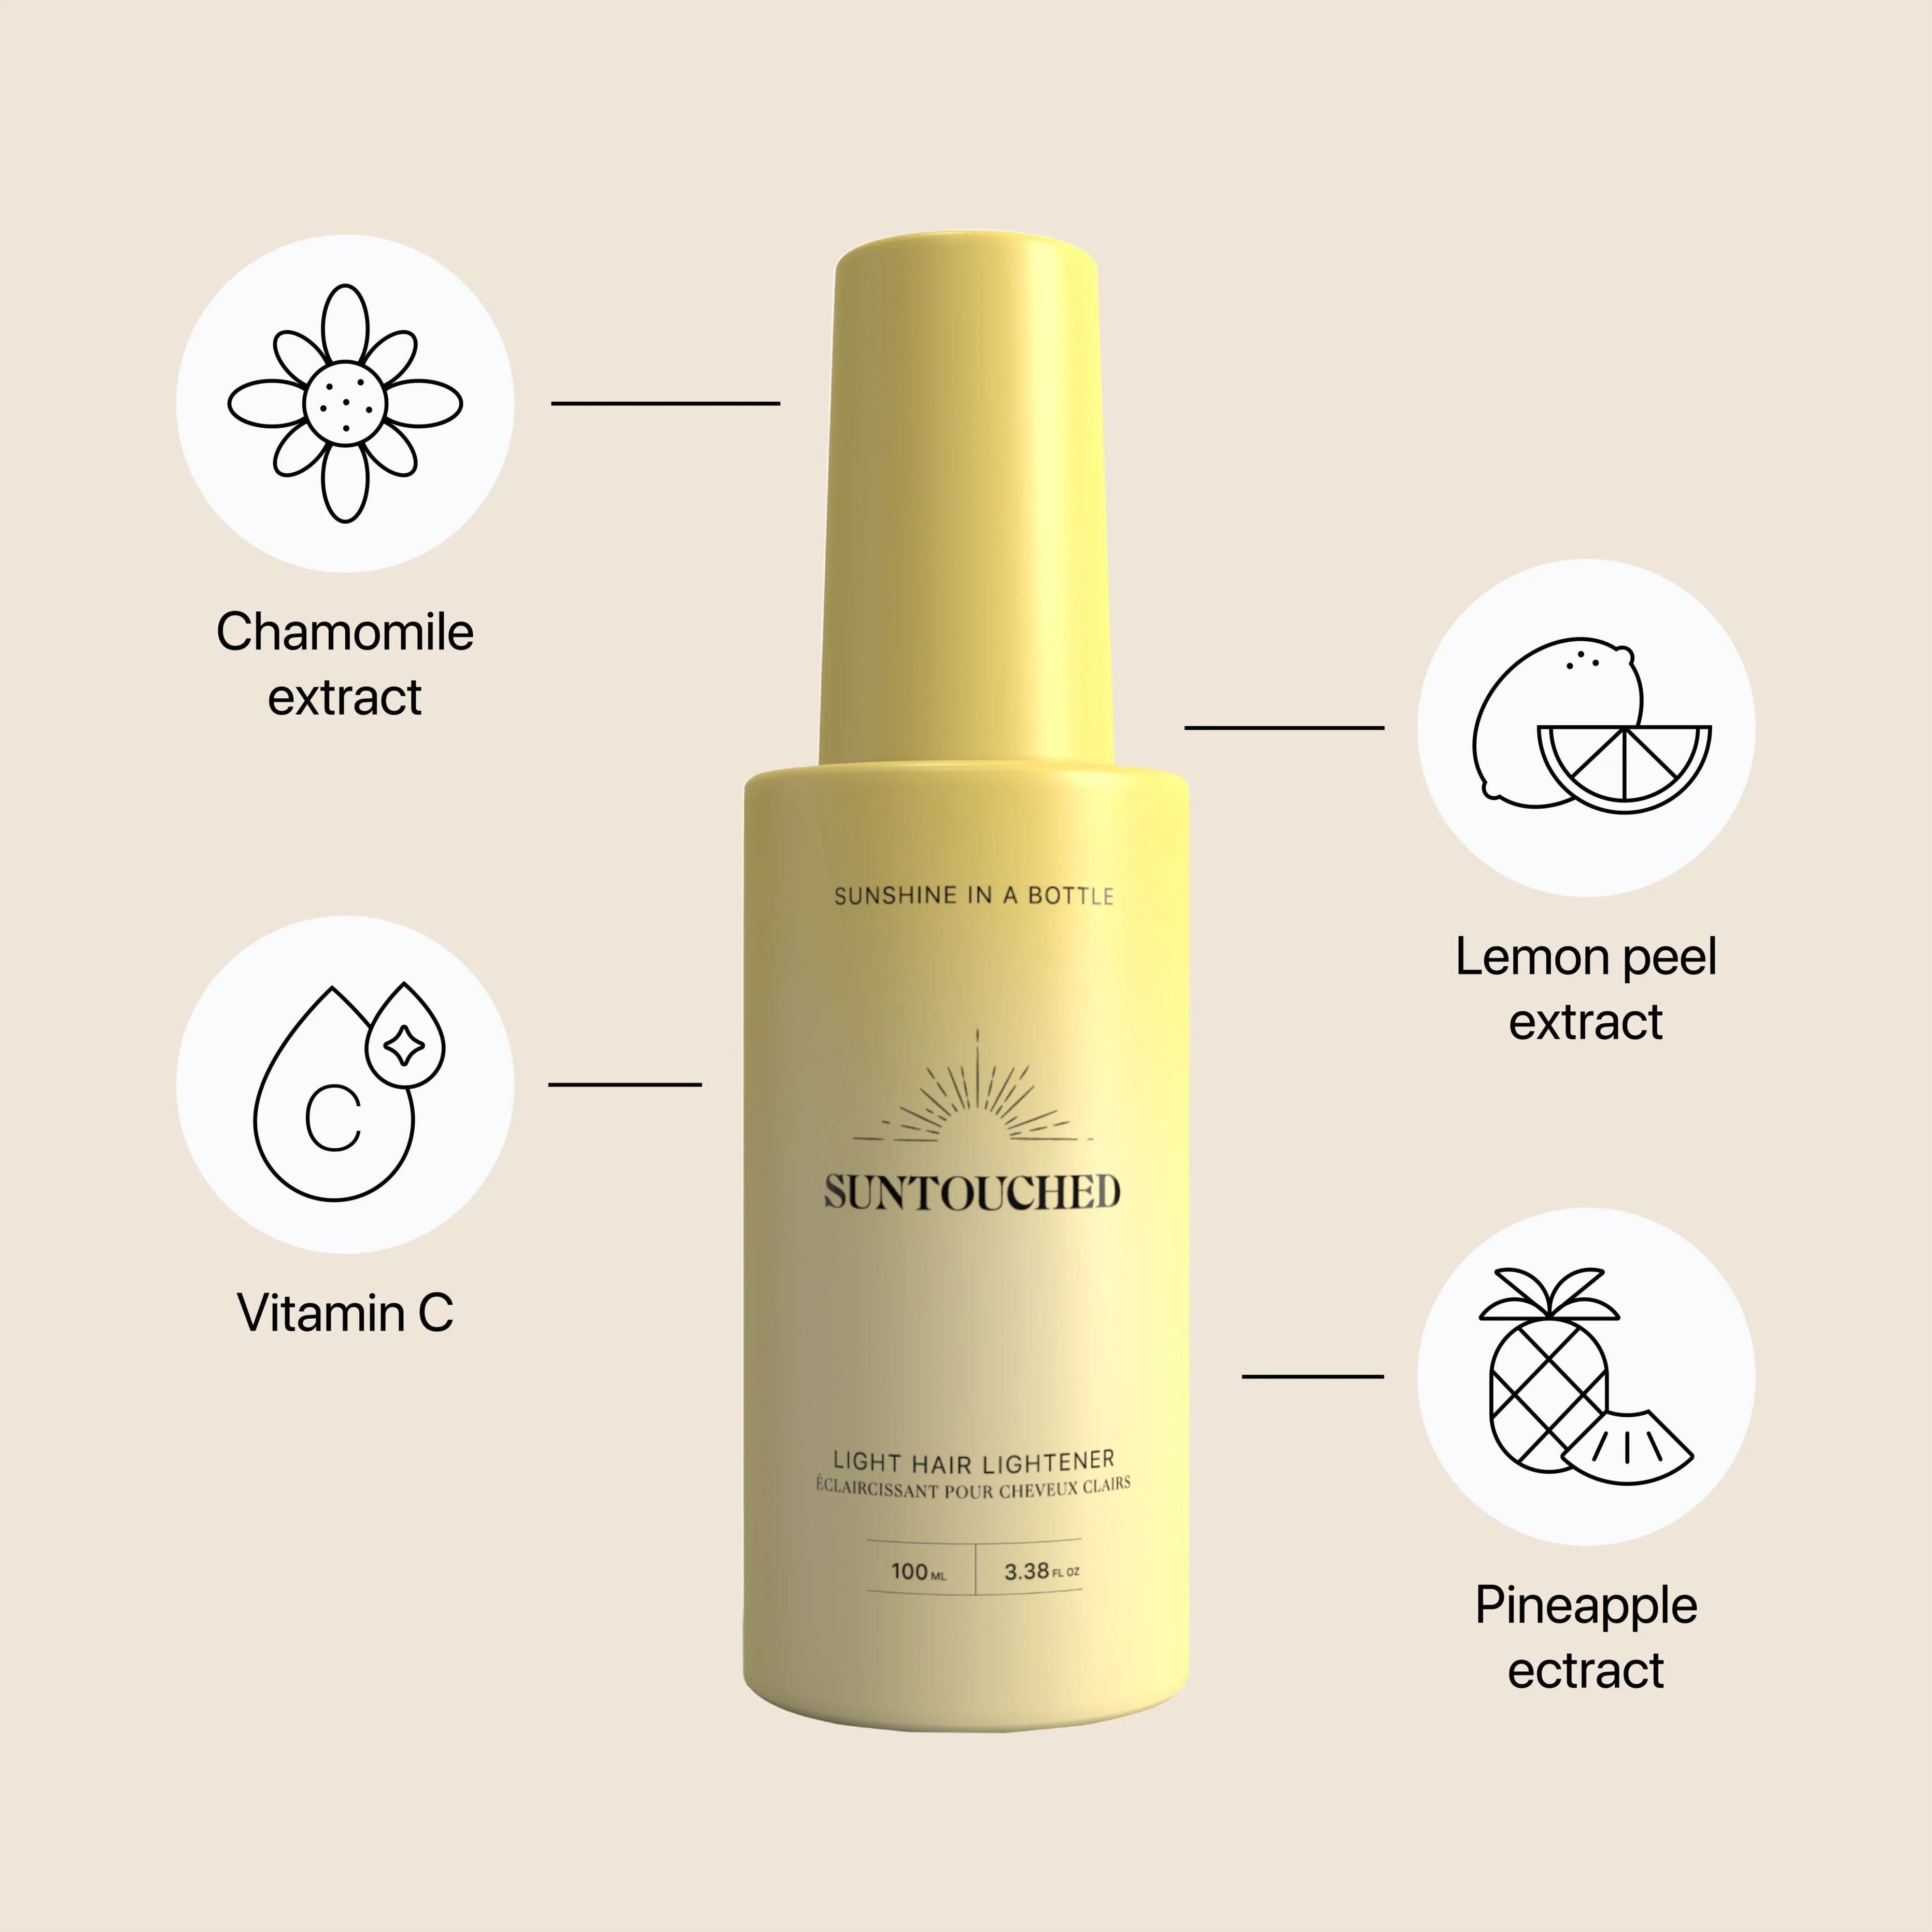 Suntouched Hair Lightener for LIGHT HAIR by SUNTOUCHED